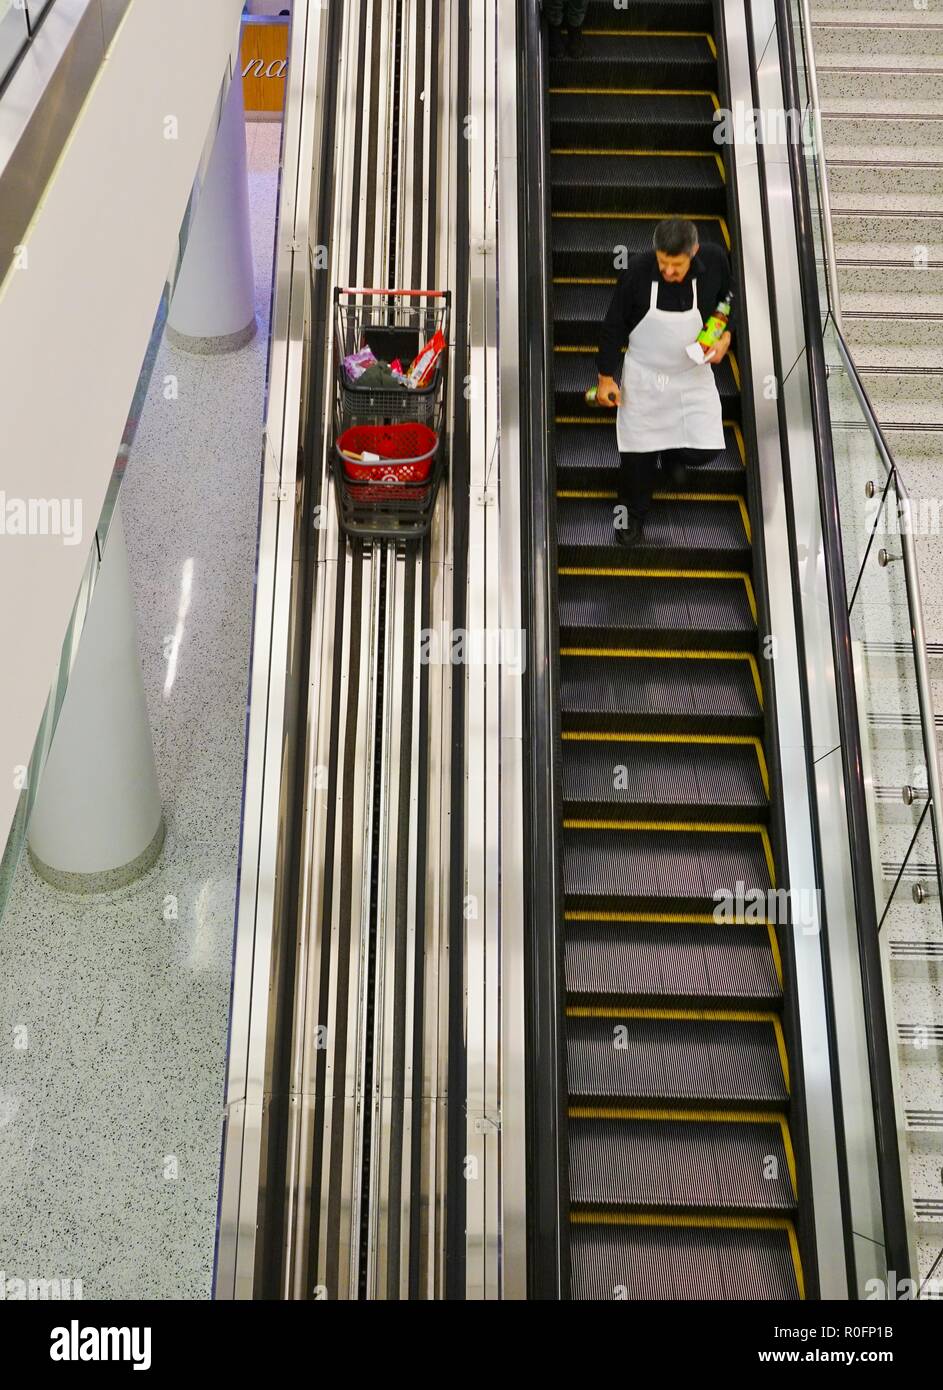 CHICAGO, IL -31 OCT 2018- View of a shopping cart conveyor escalator bringing carts up and down parallel to the customers in a two-story Target store. Stock Photo